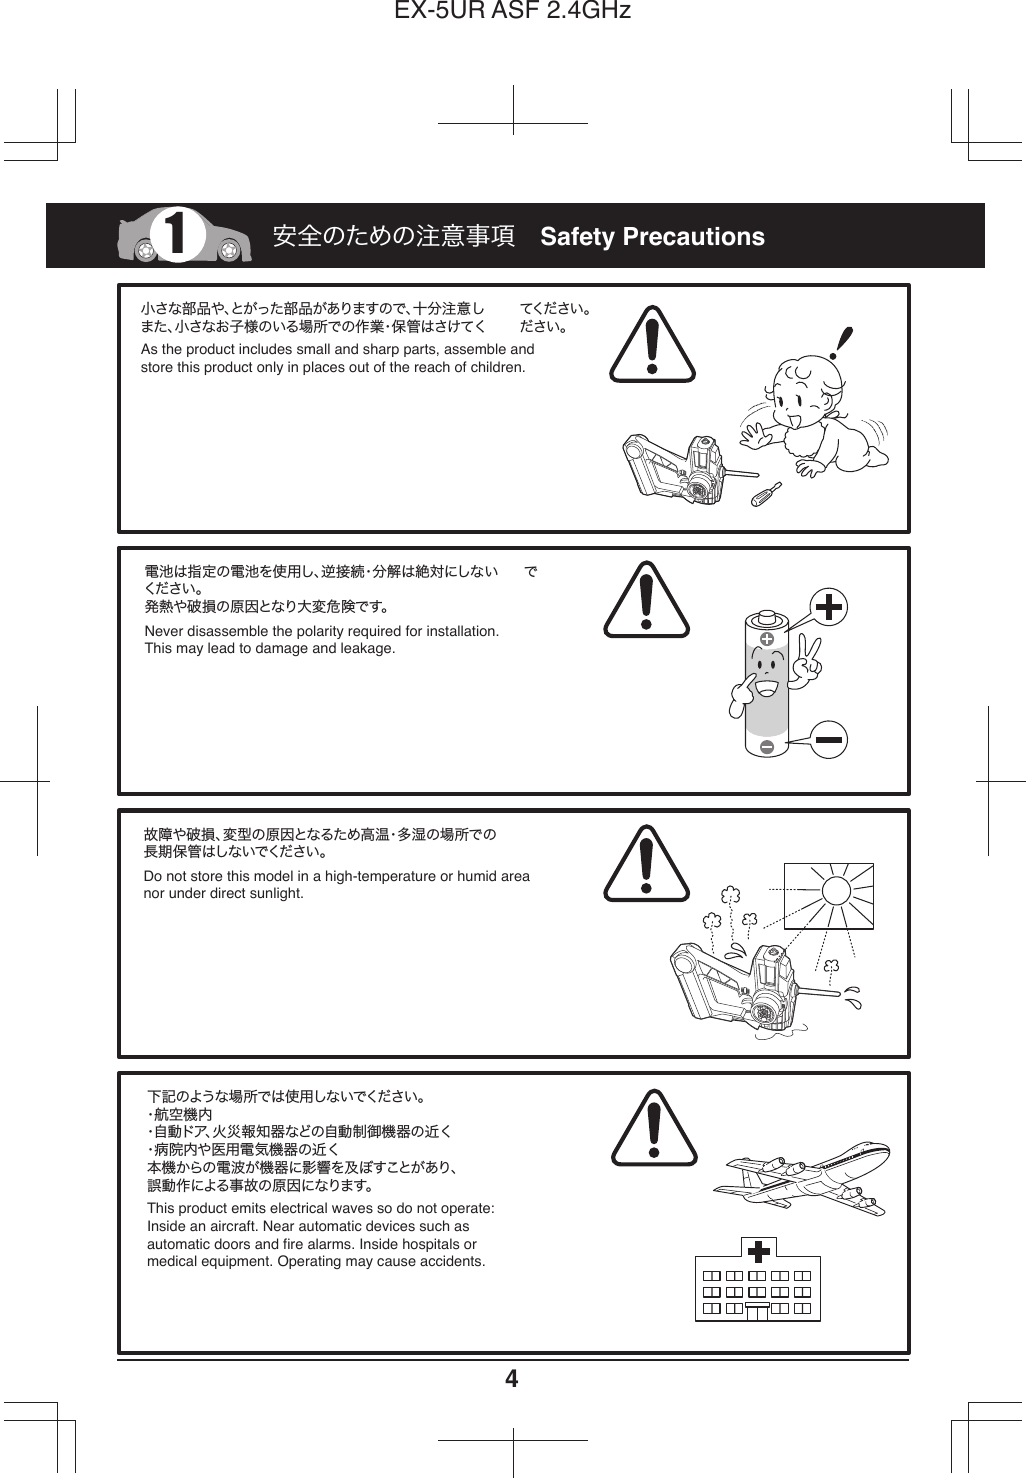 4EX-5UR ASF 2.4GHzAs the product includes small and sharp parts, assemble and store this product only in places out of the reach of children. Never disassemble the polarity required for installation. This may lead to damage and leakage.故障や破損、変型の原因となるため高温・多湿の場所での長期保管はしないでください。電池は指定の電池を使用し、逆接続・分解は絶対にしない でください 。発熱や破損の原因となり大変危険です。Do not store this model in a high-temperature or humid area nor under direct sunlight.下記のような場所では使用しないでください。・航空機内・自動ドア、火災報知器などの自動制御機器の近く・病院内や医用電気機器の近く本機からの電波が機器に影響を及ぼすことがあり、誤動作による事故の原因になります。1Safety Precautions安全のための注意事項小さな部品や、とがった部品がありますので、十分注意し てください 。また、小さなお子様のいる場所での作業・保管はさけてく ださい。This product emits electrical waves so do not operate: Inside an aircraft. Near automatic devices such as automatic doors and fire alarms. Inside hospitals ormedical equipment. Operating may cause accidents.